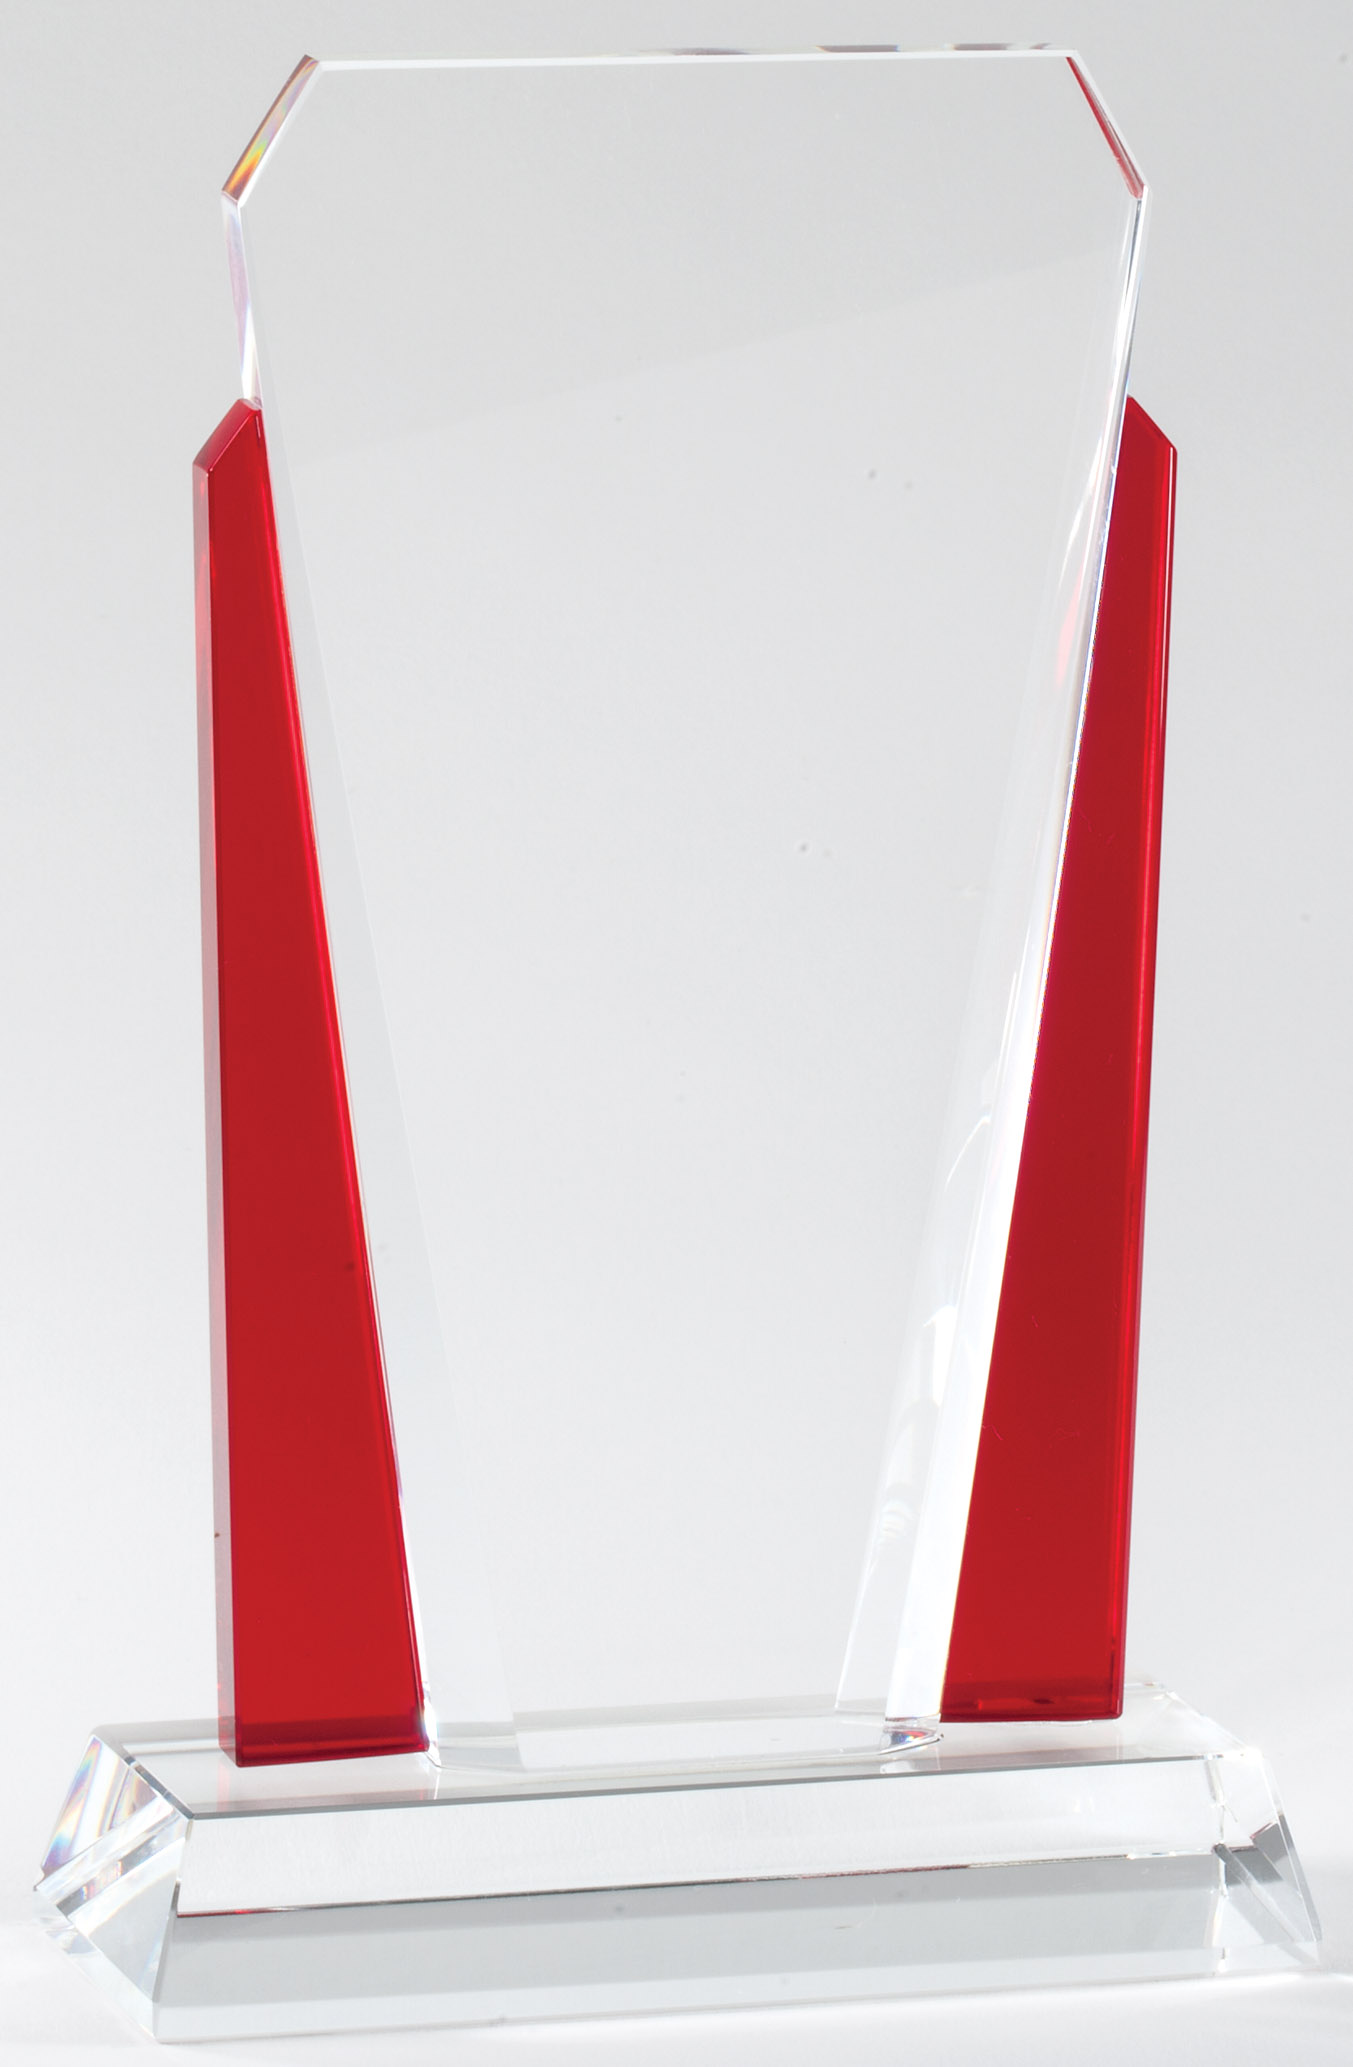 Crystal with Red Access Award on Base